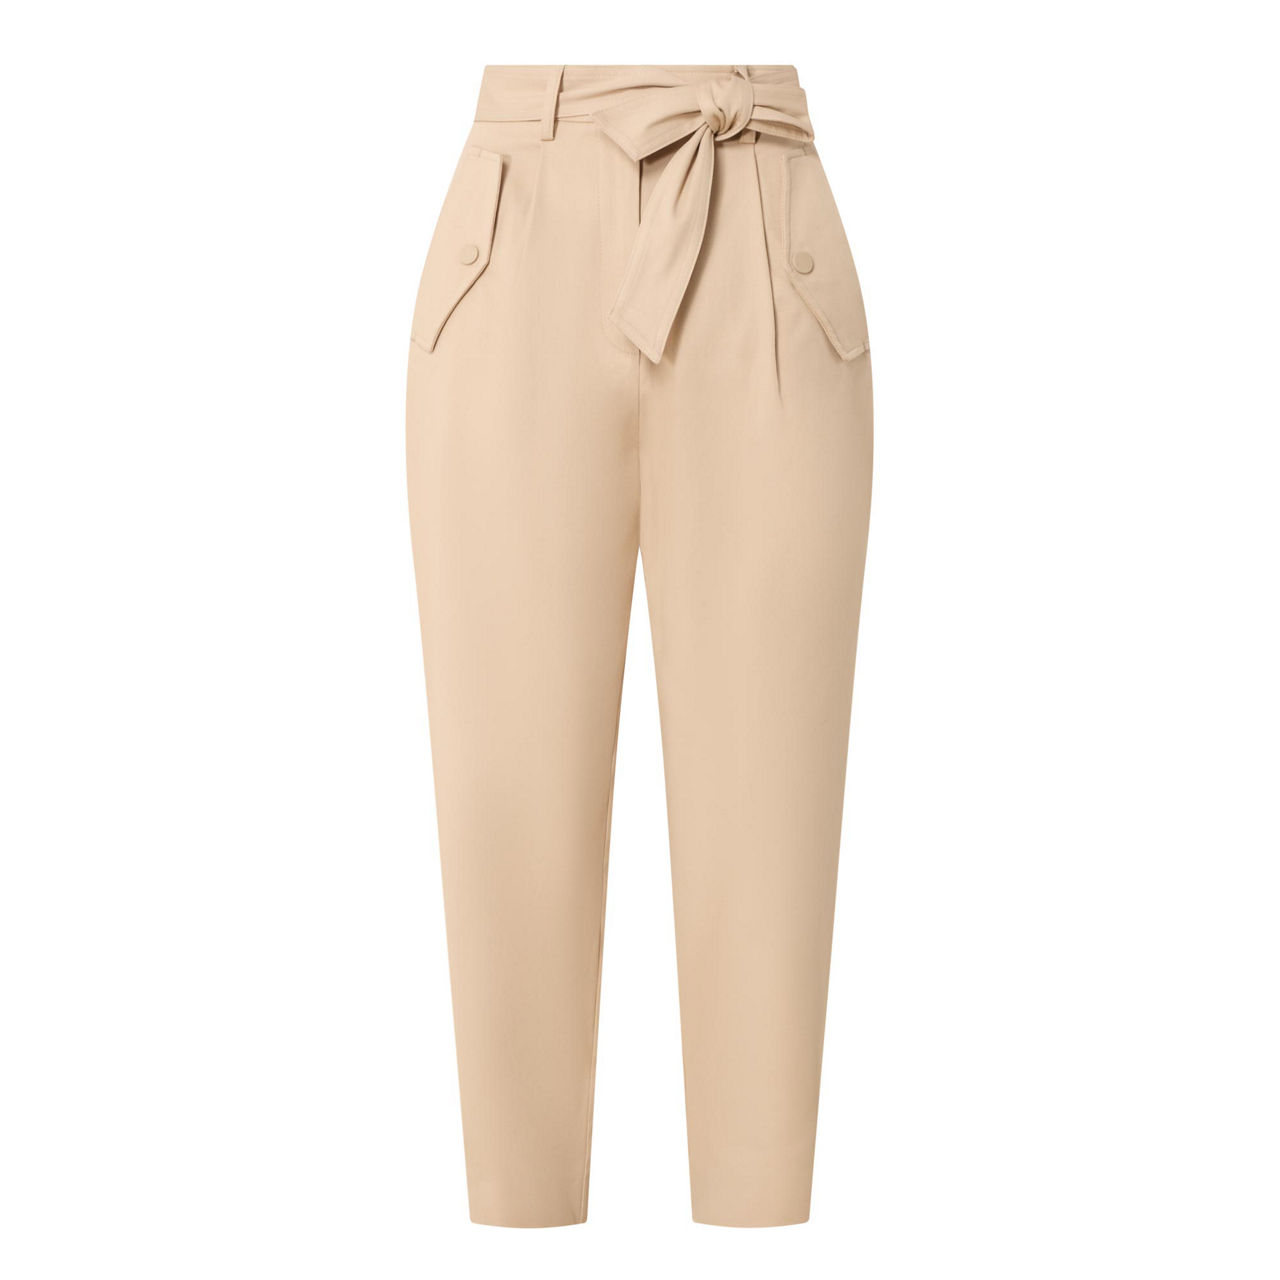 WEEKEND MAX MARA Occhio Belted Slim Fit Trousers